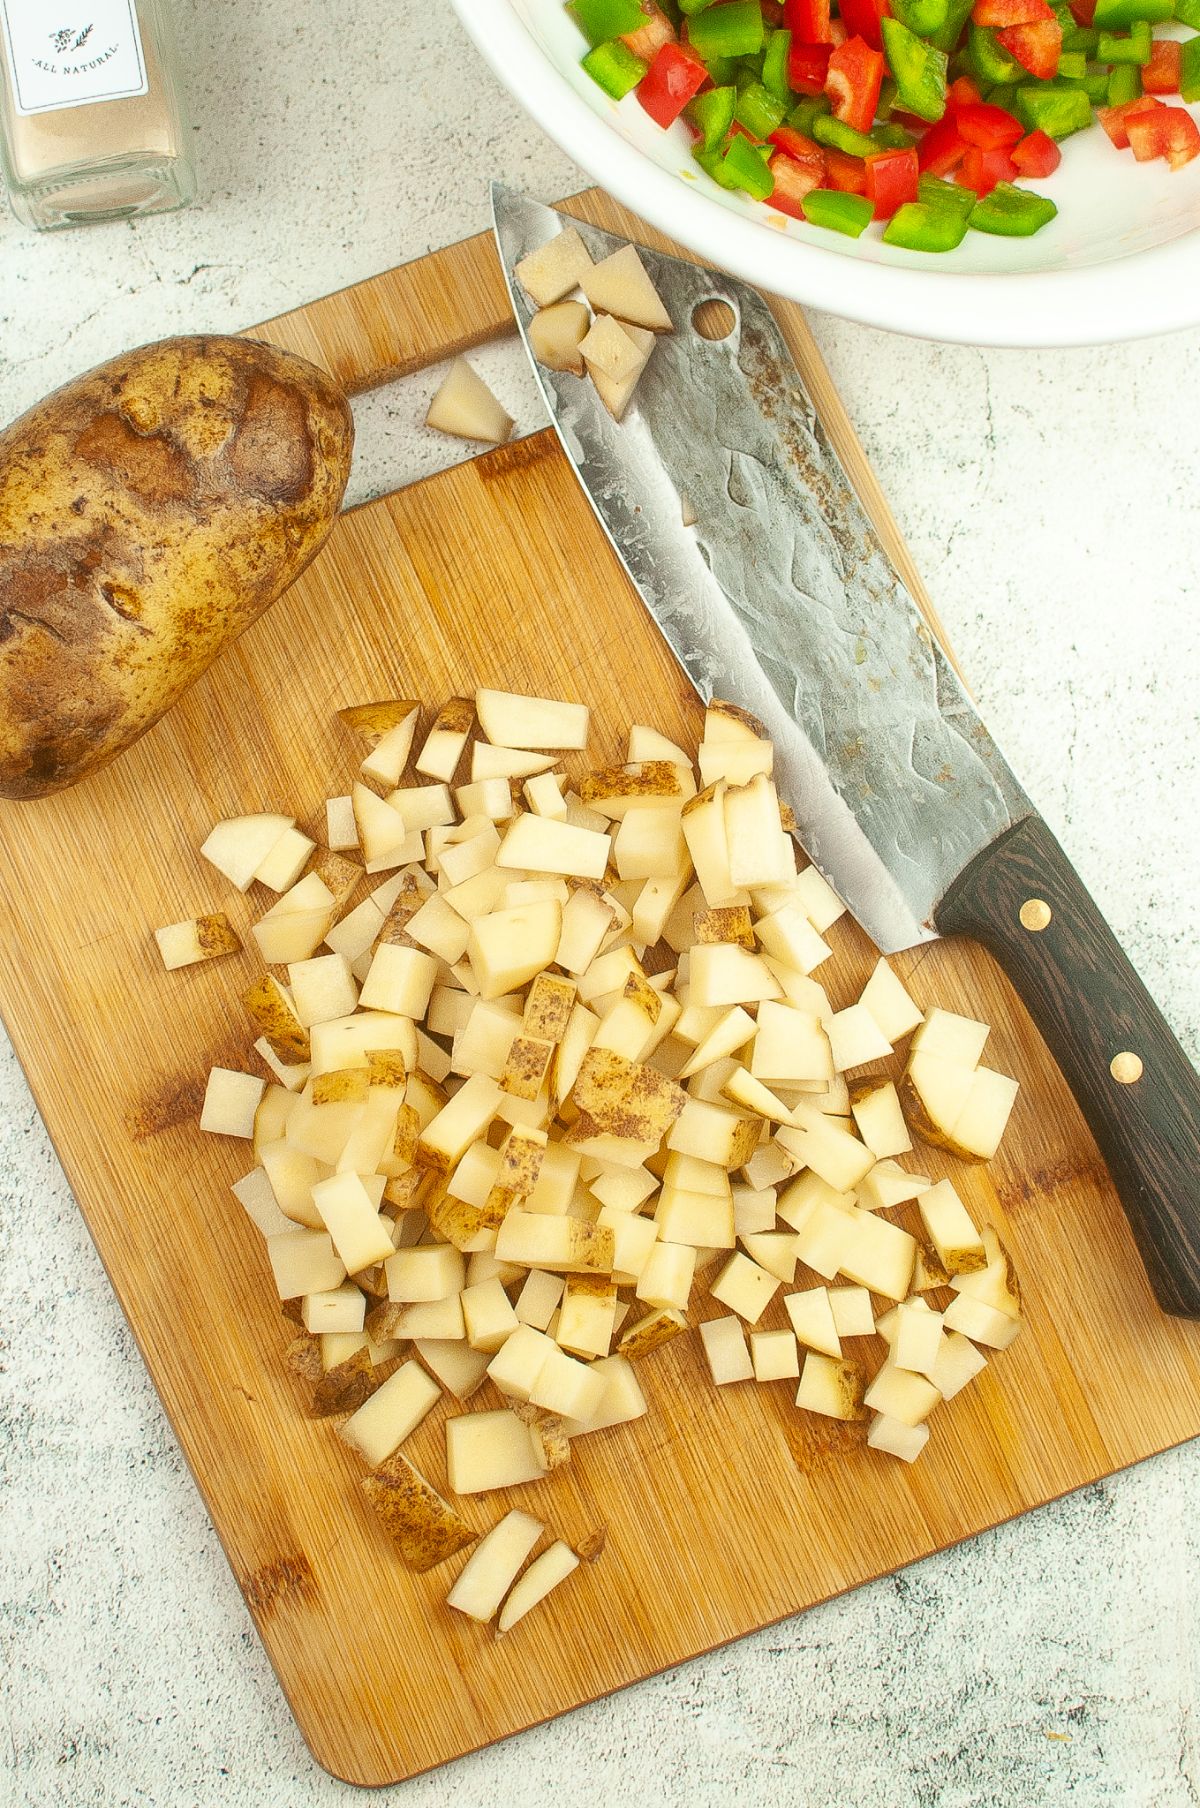 Chopped potatoes on a wooden chopping board with knife and bowl of chopped peppers on the side.